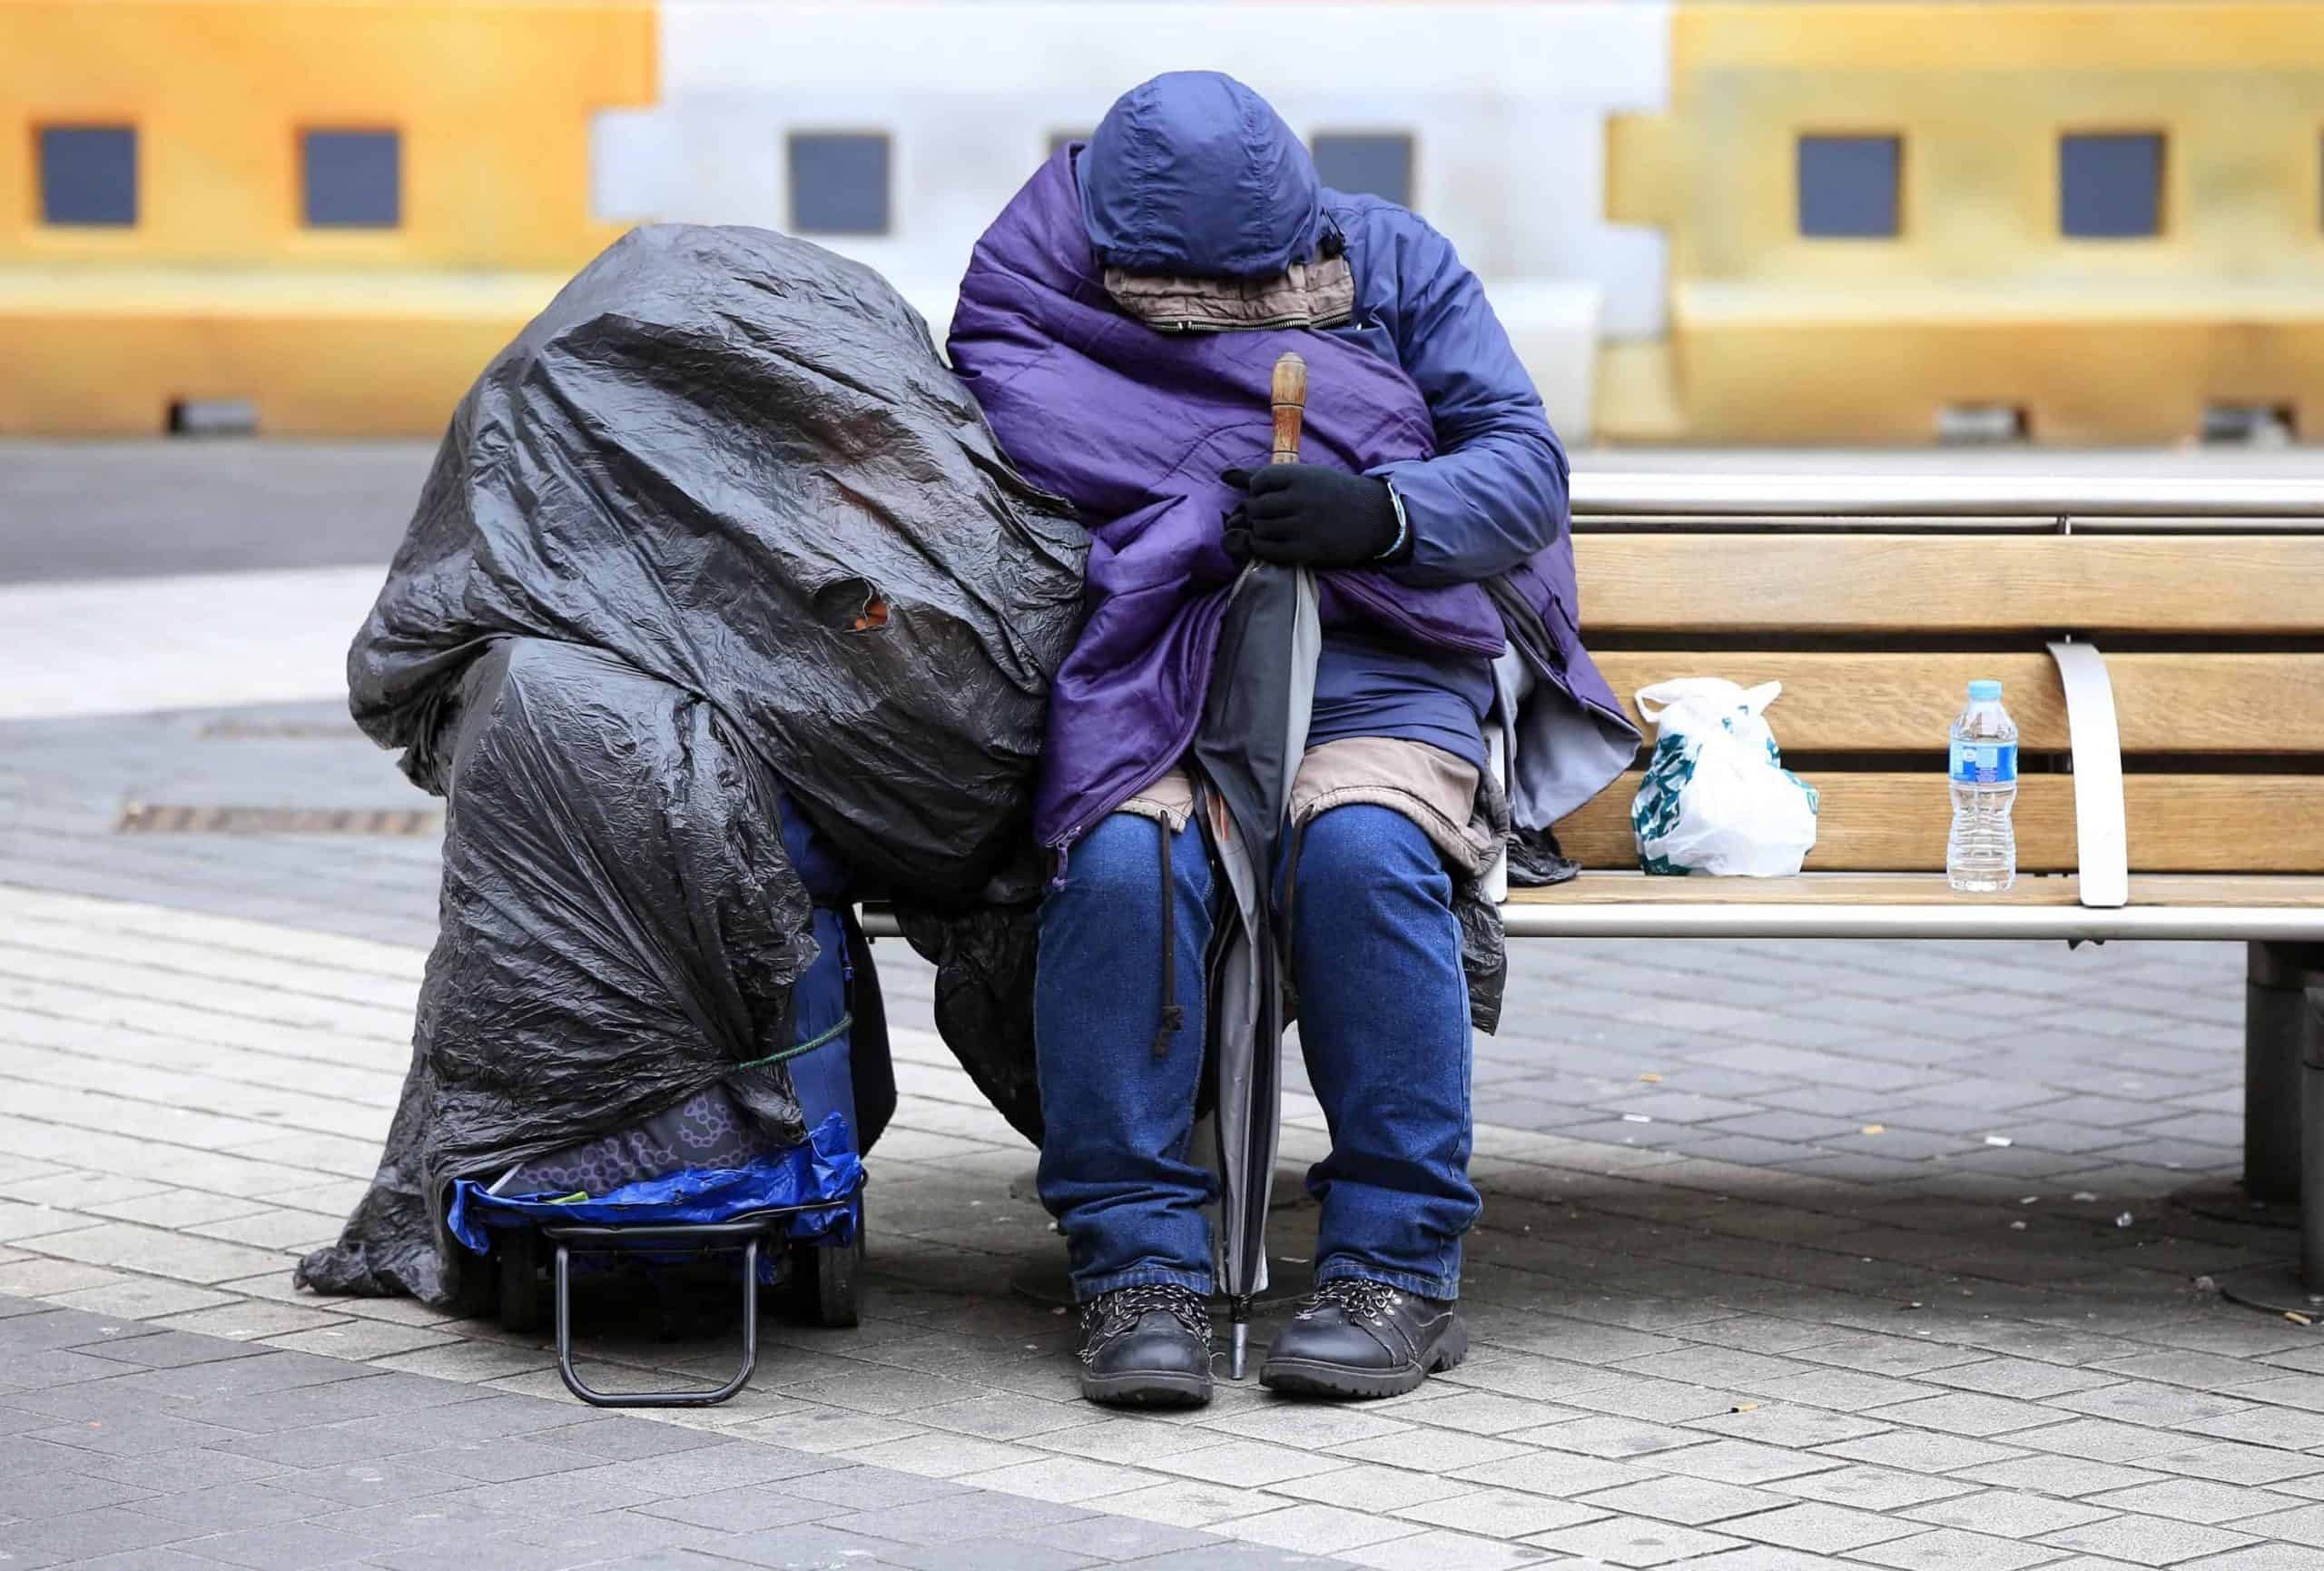 22,000 young people at risk of being homeless at Christmas